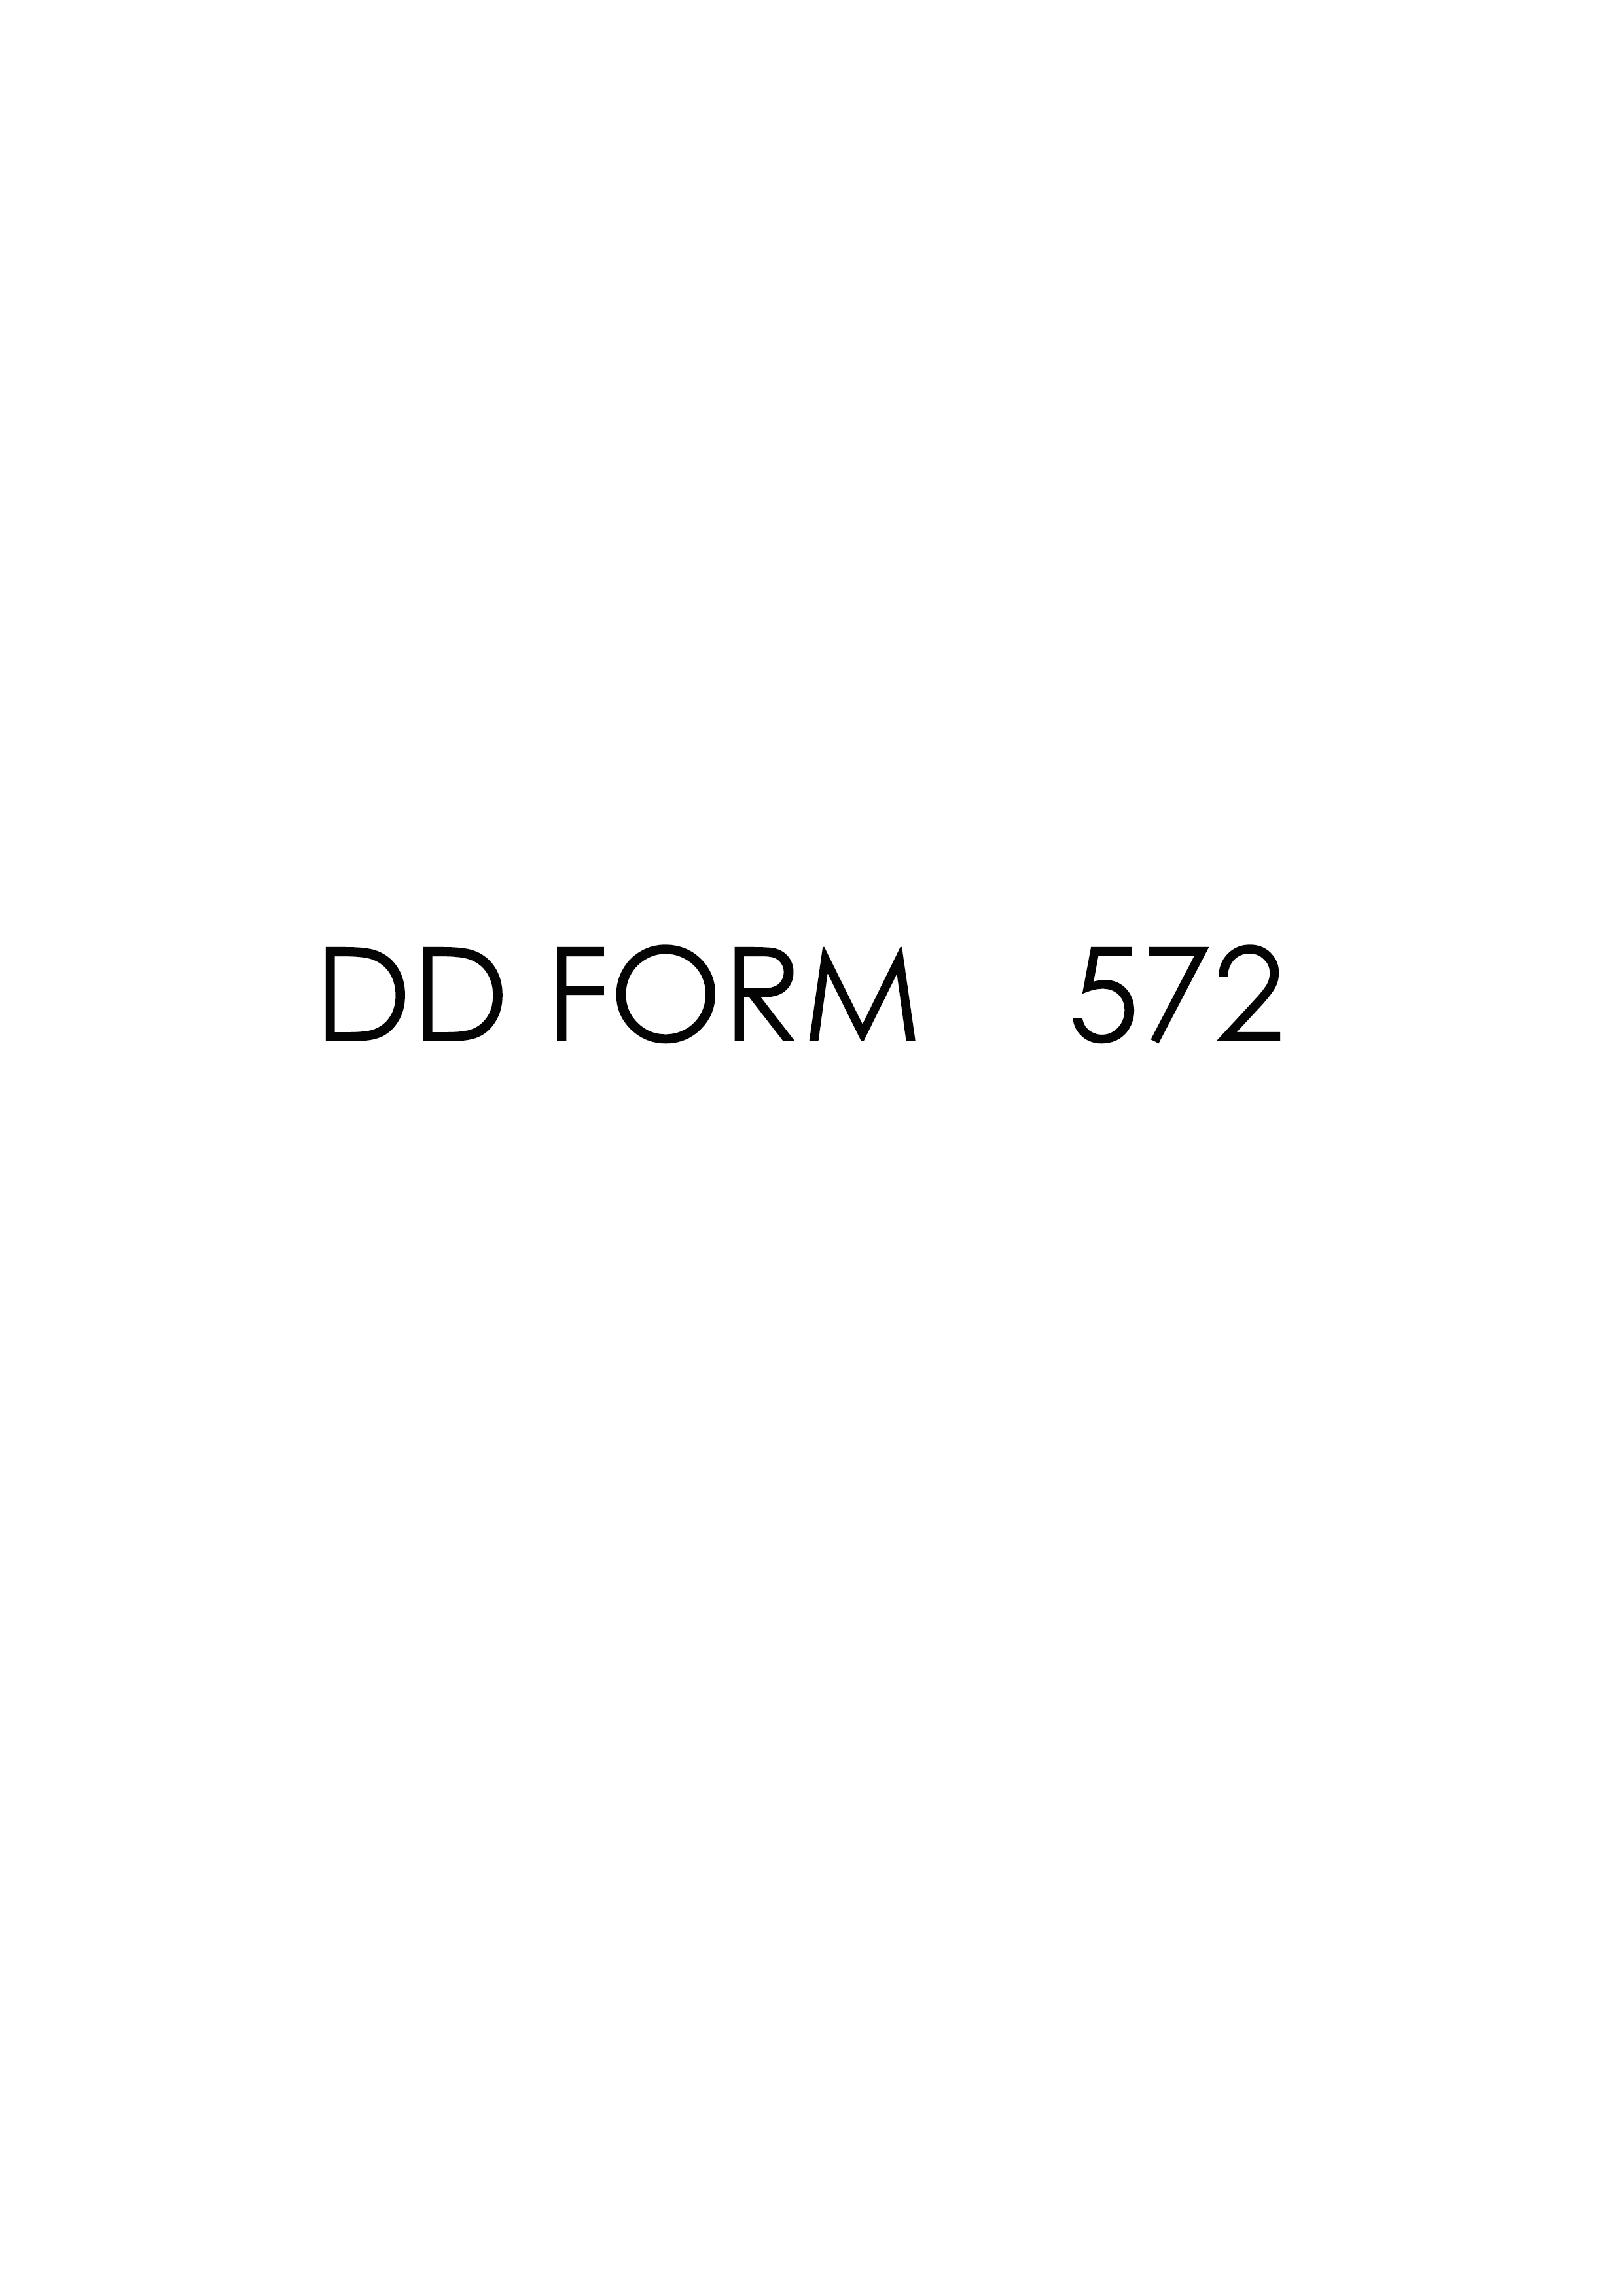 Download Fillable dd Form 572